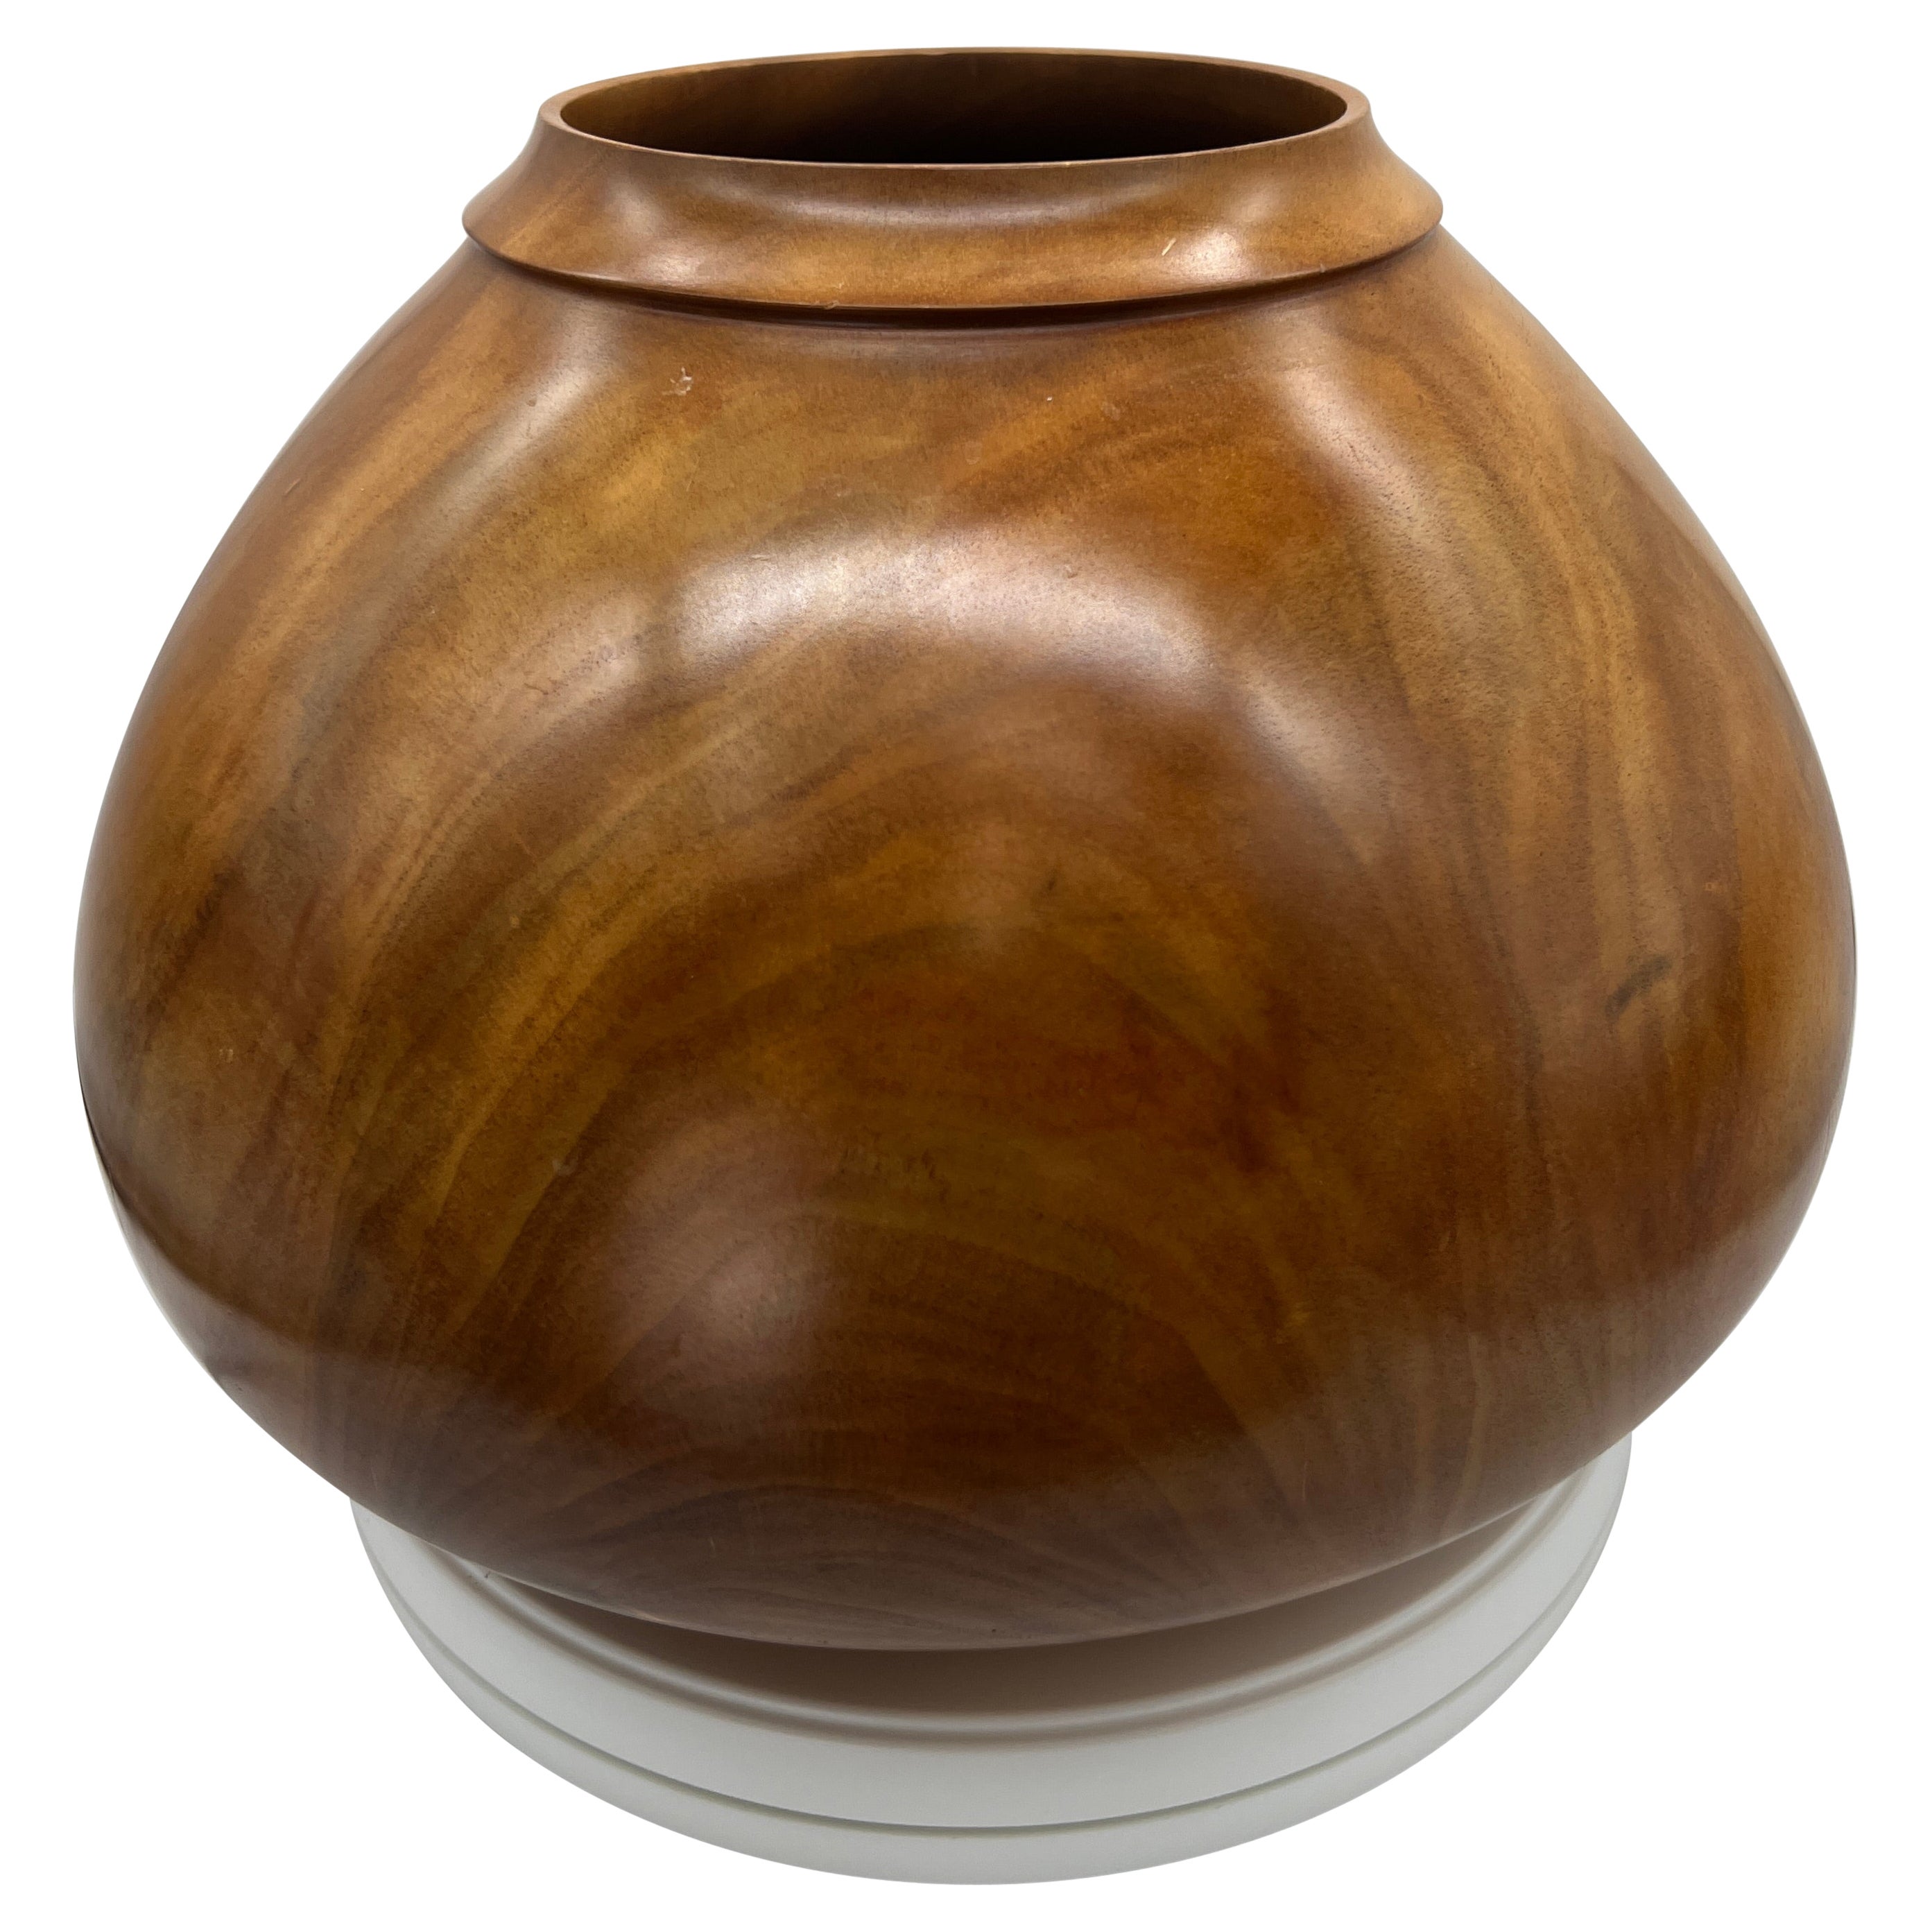 What is the best wood for turning bowls?